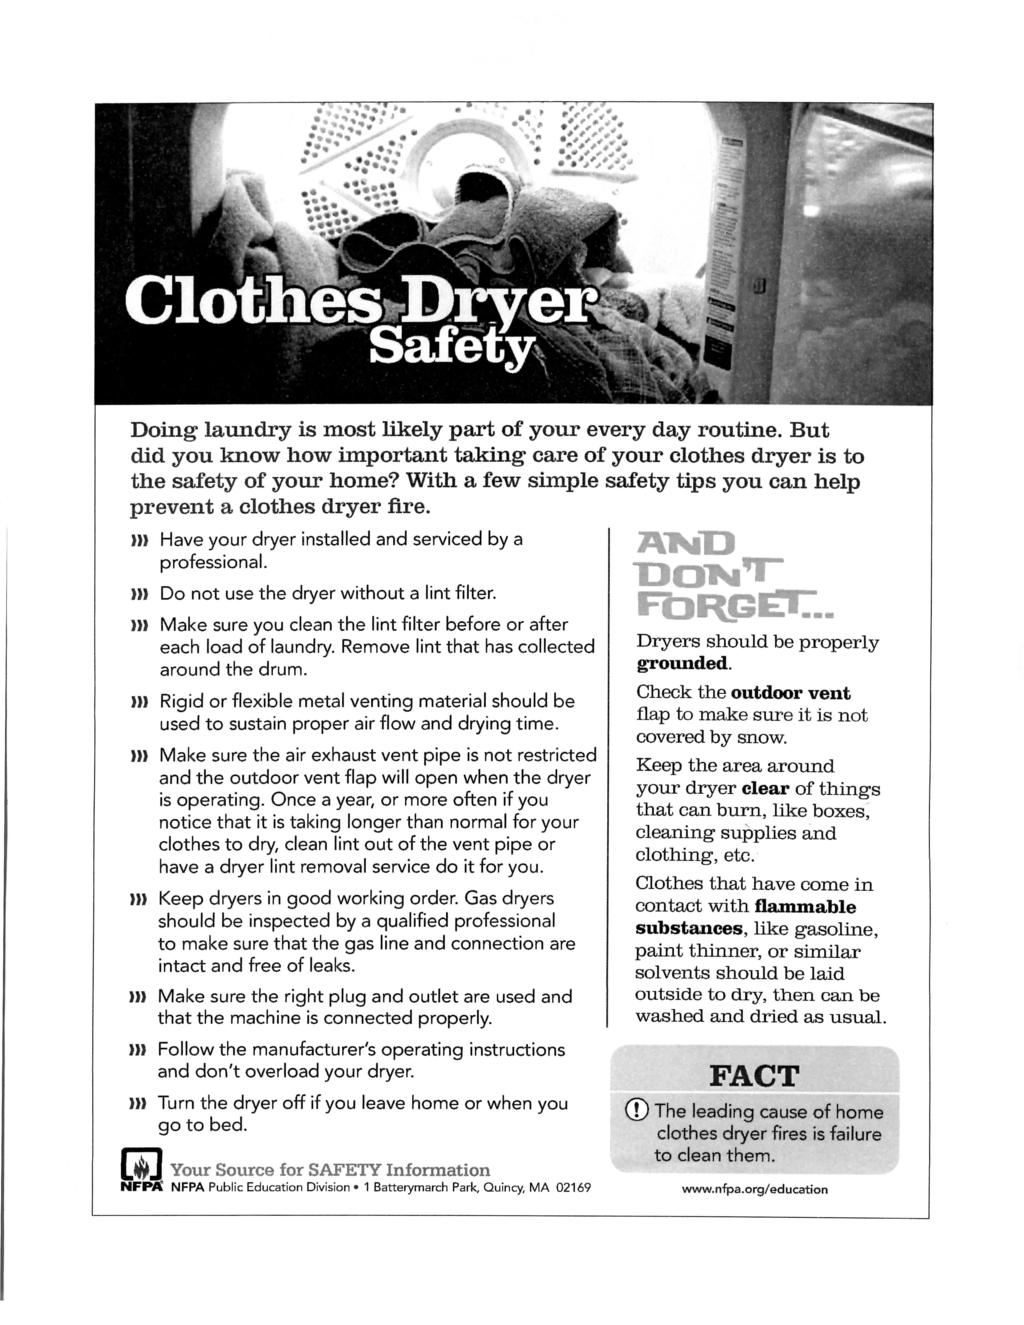 y^^^fr^ i ClotnlsJjryeF Safety V Y Doing laundry is most likely part of your every day routine. But did you know how important taking care of your clothes dryer is to the safety of your home?